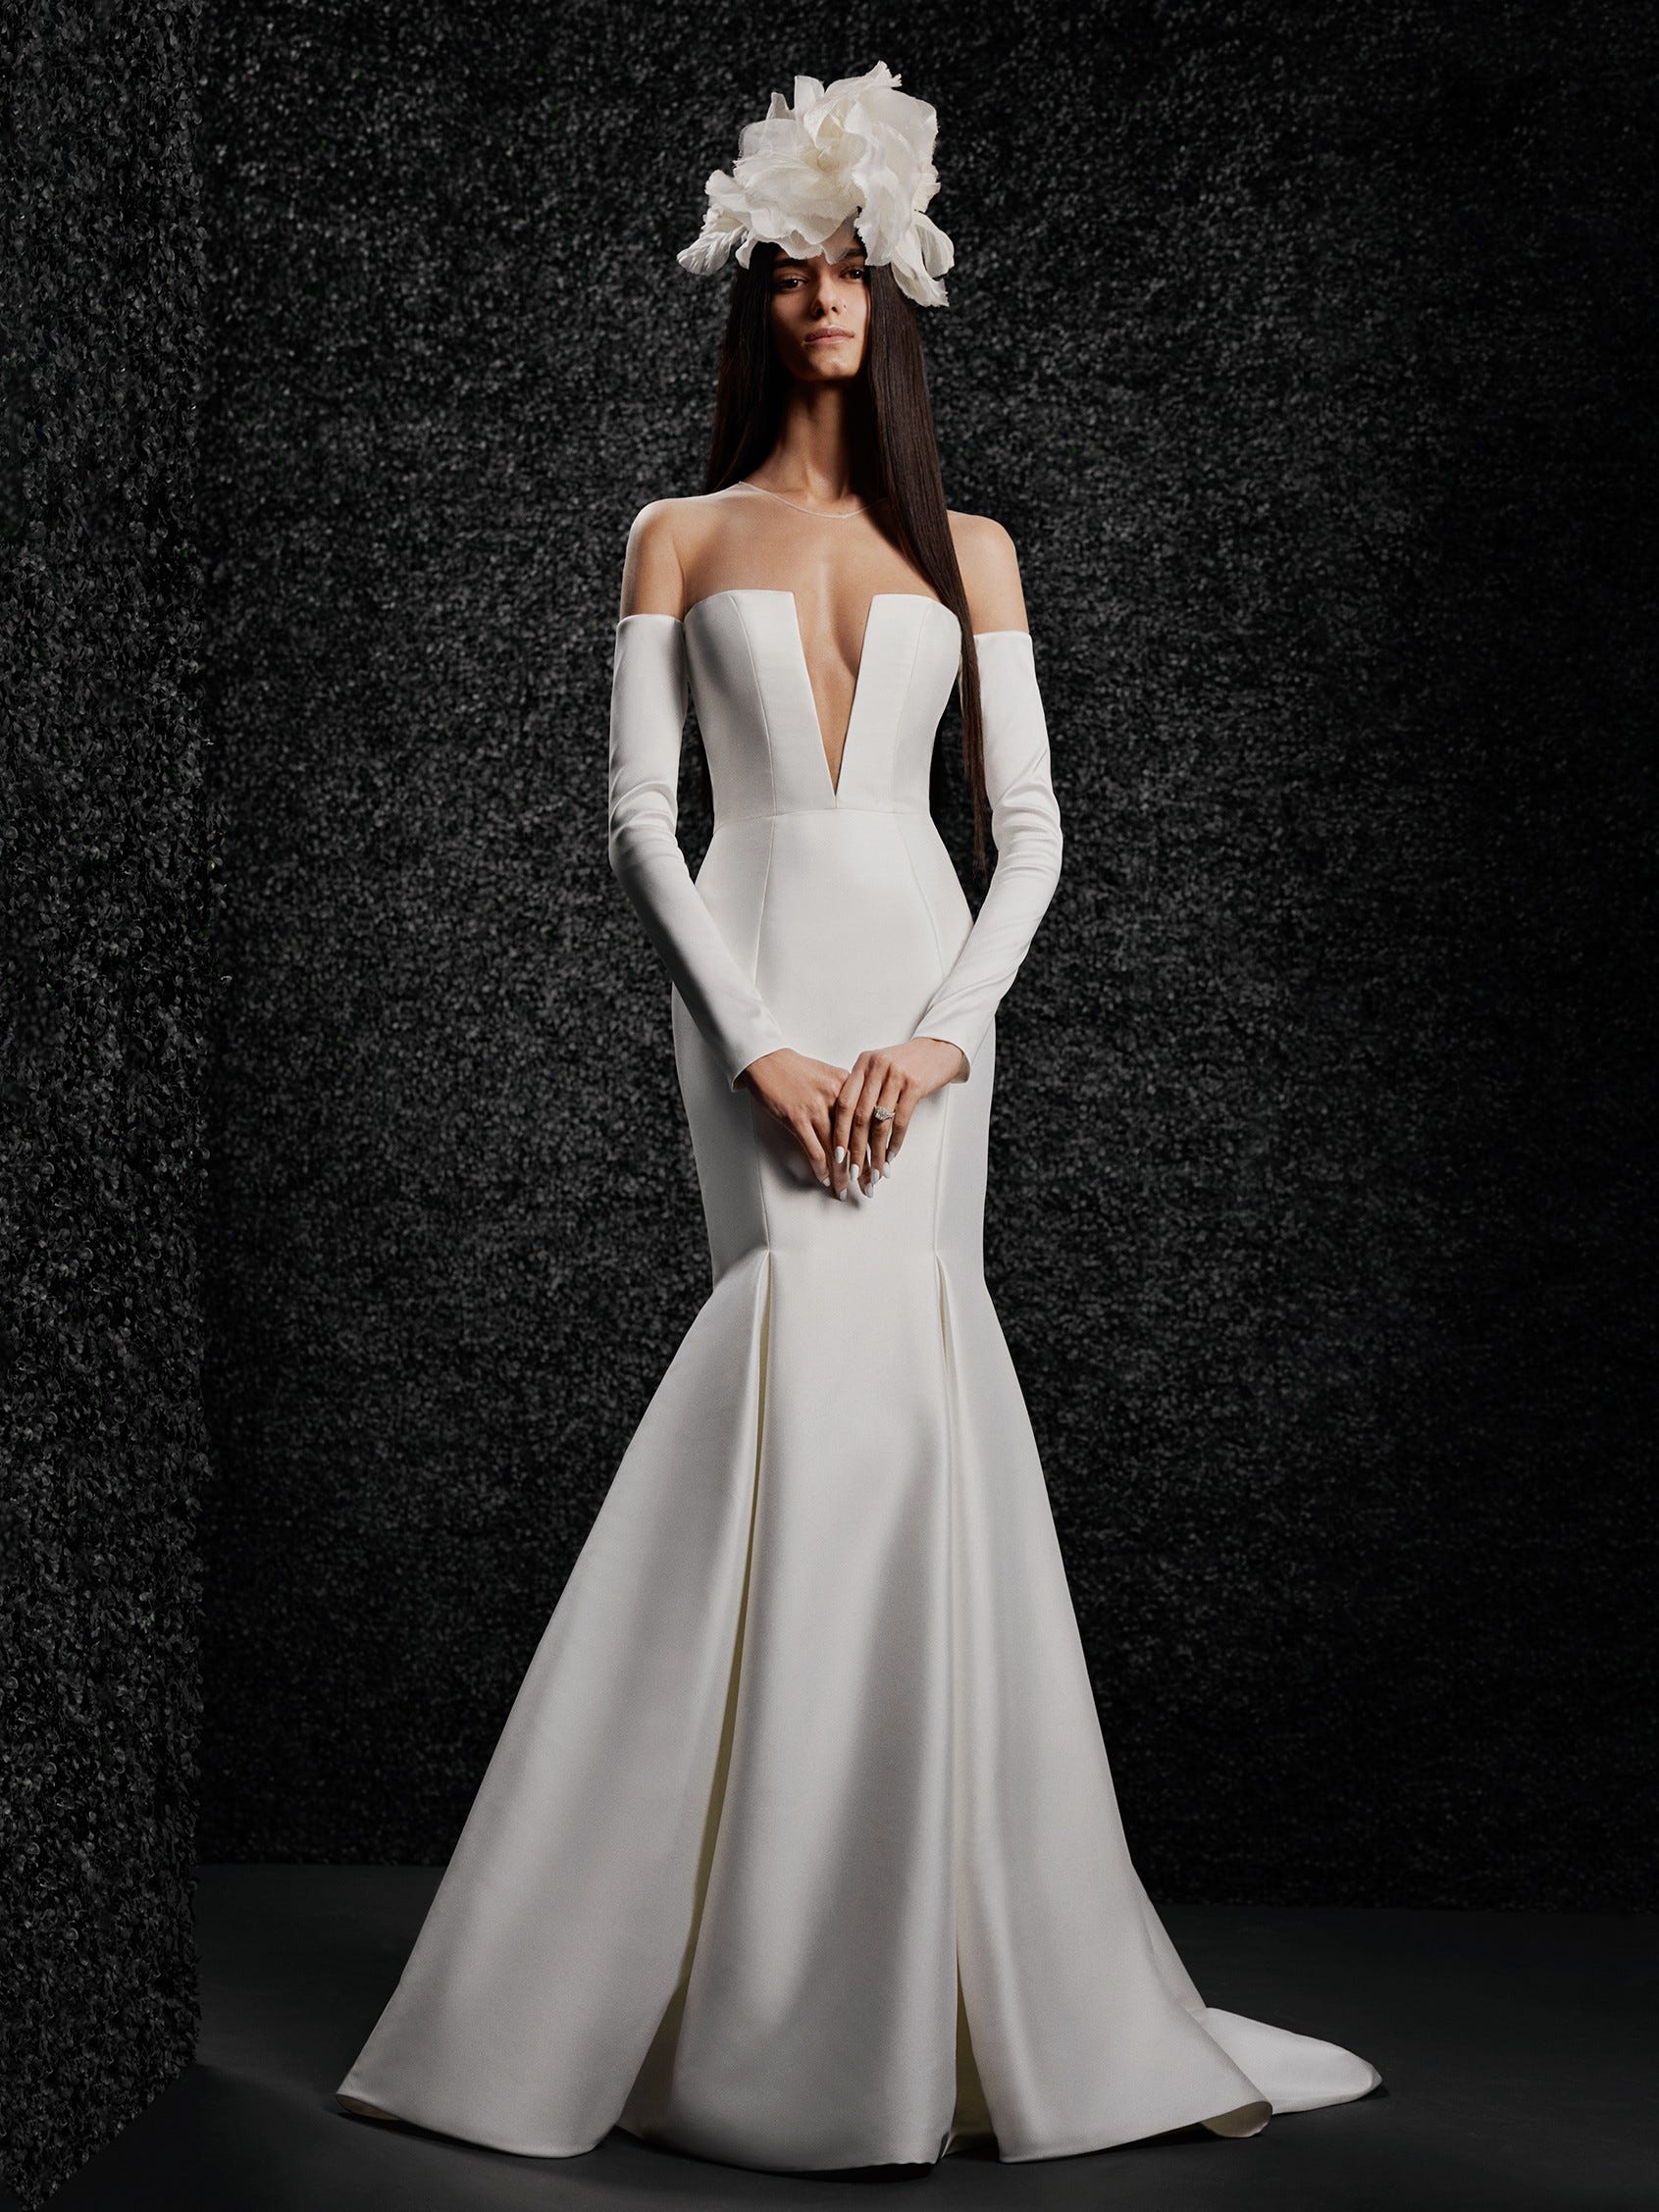 https://www.verawangbride.com/media/catalog/product/m/i/mishell_b.jpg?quality=80&bg-color=255,255,255&fit=bounds&height=1023&width=767&canvas=767:1023